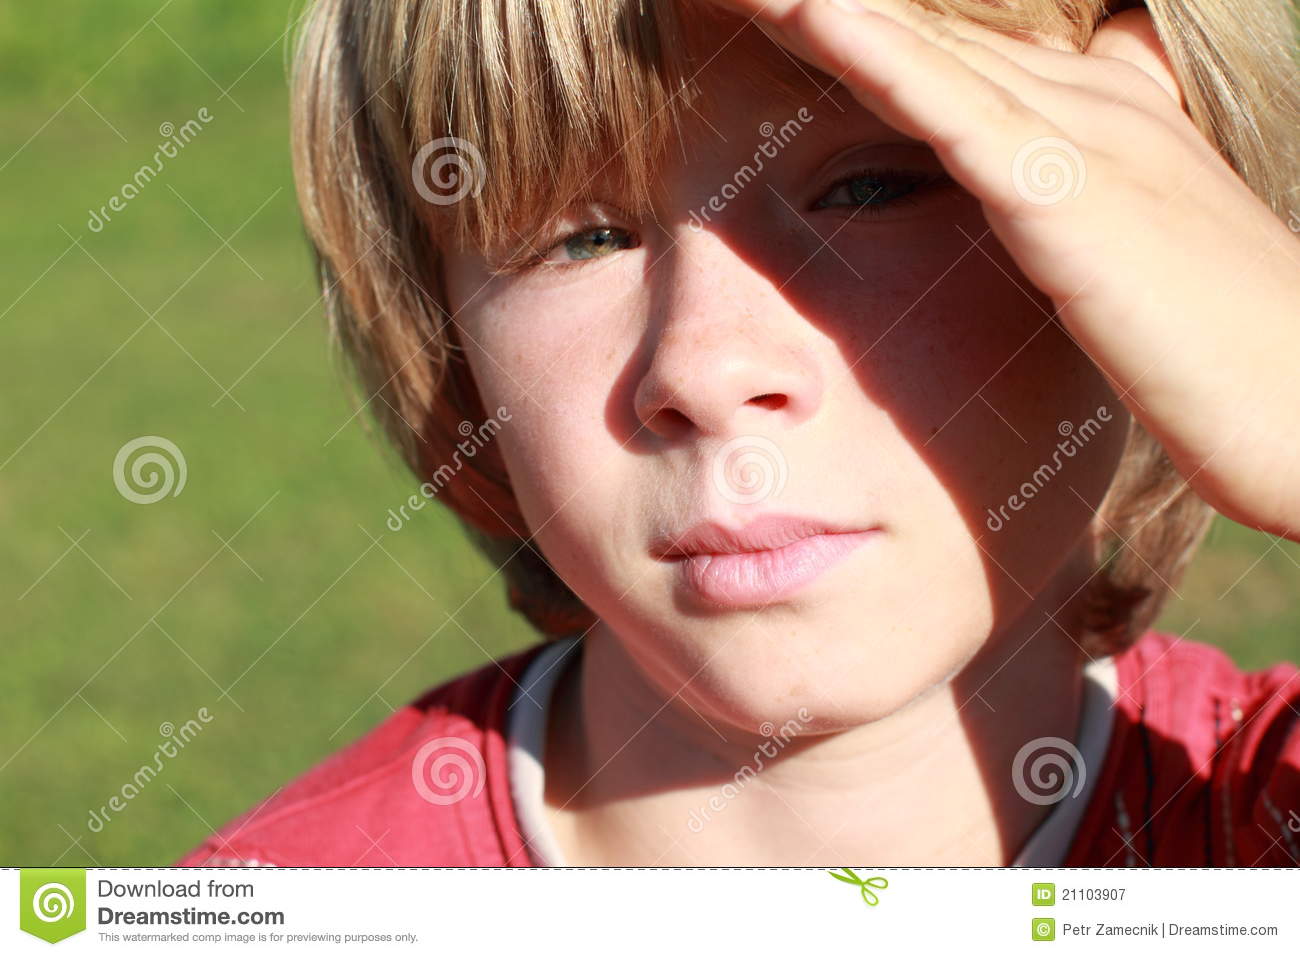 Serious Boy Royalty Free Stock Photography   Image  21103907